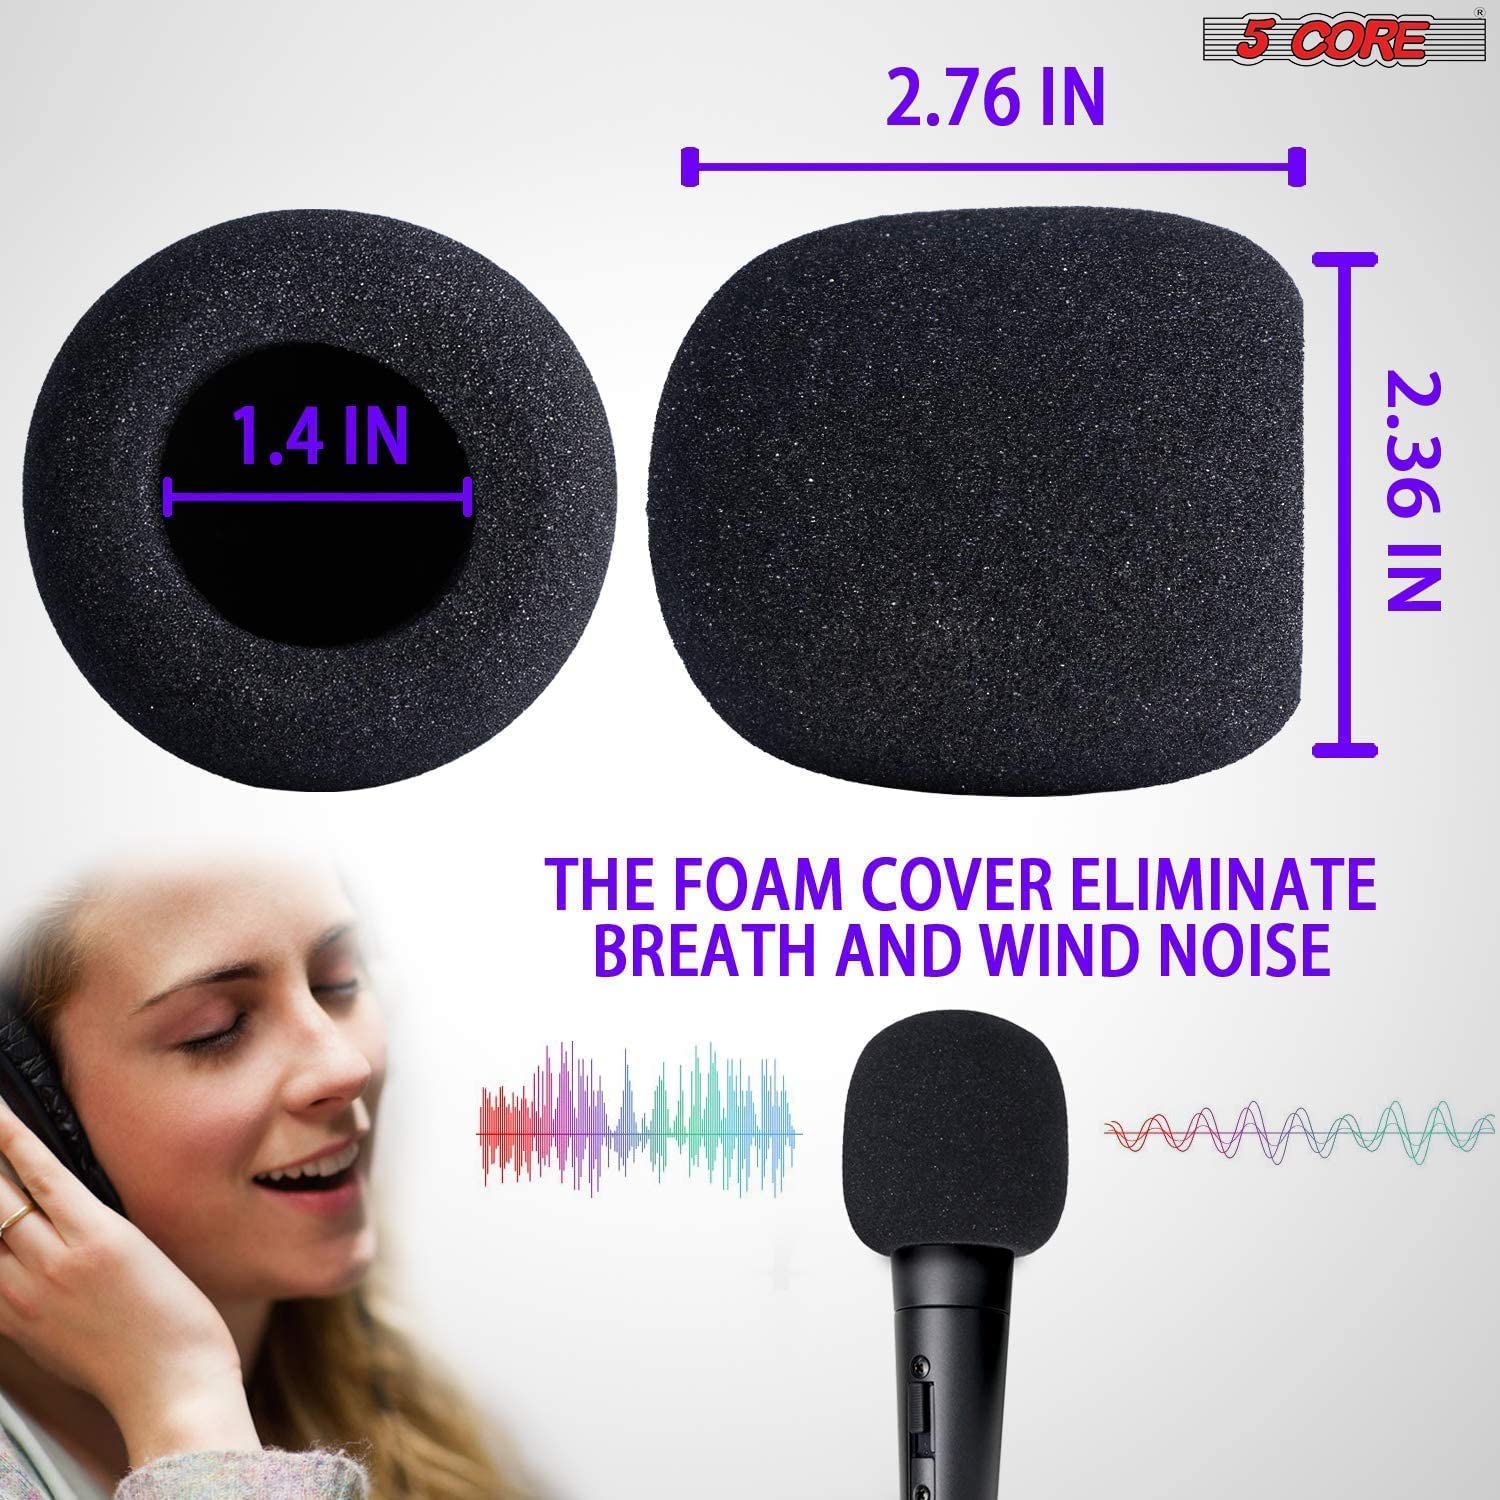 The foam cover eliminate breath and wind noise